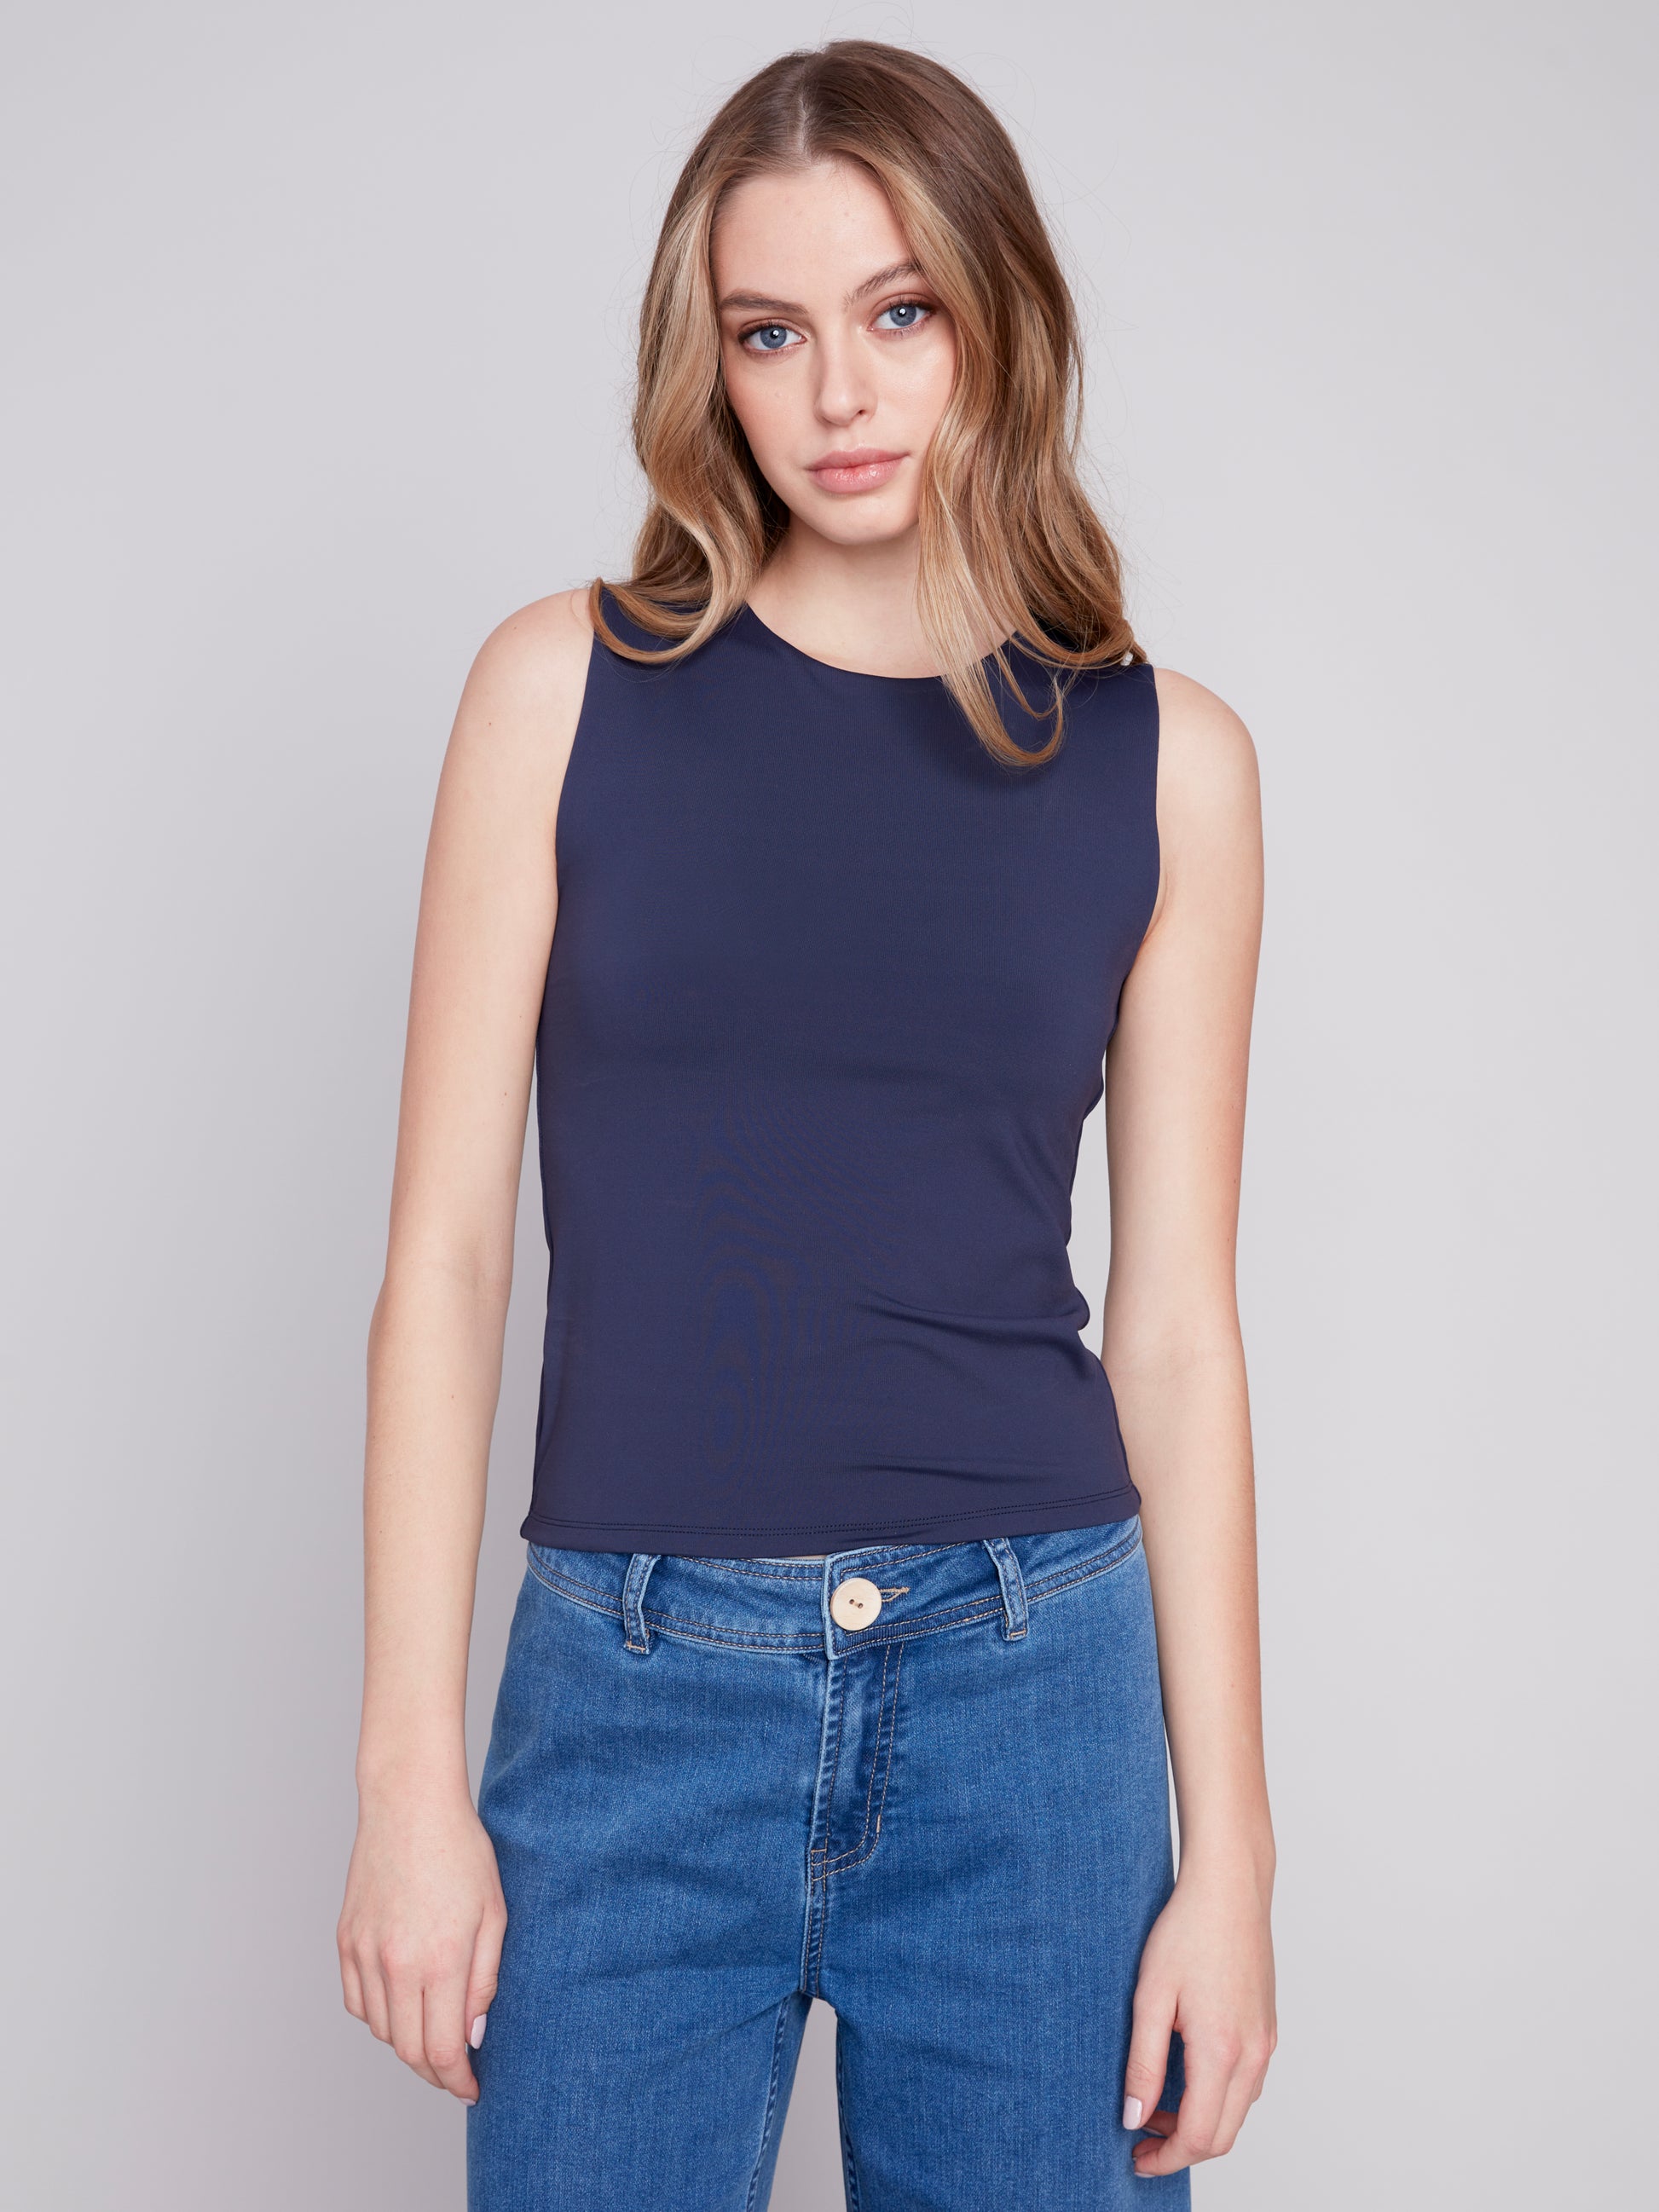 The fashionable model is wearing a comfortable Charlie B navy Sleeveless Rib Tank Top and blue jeans.